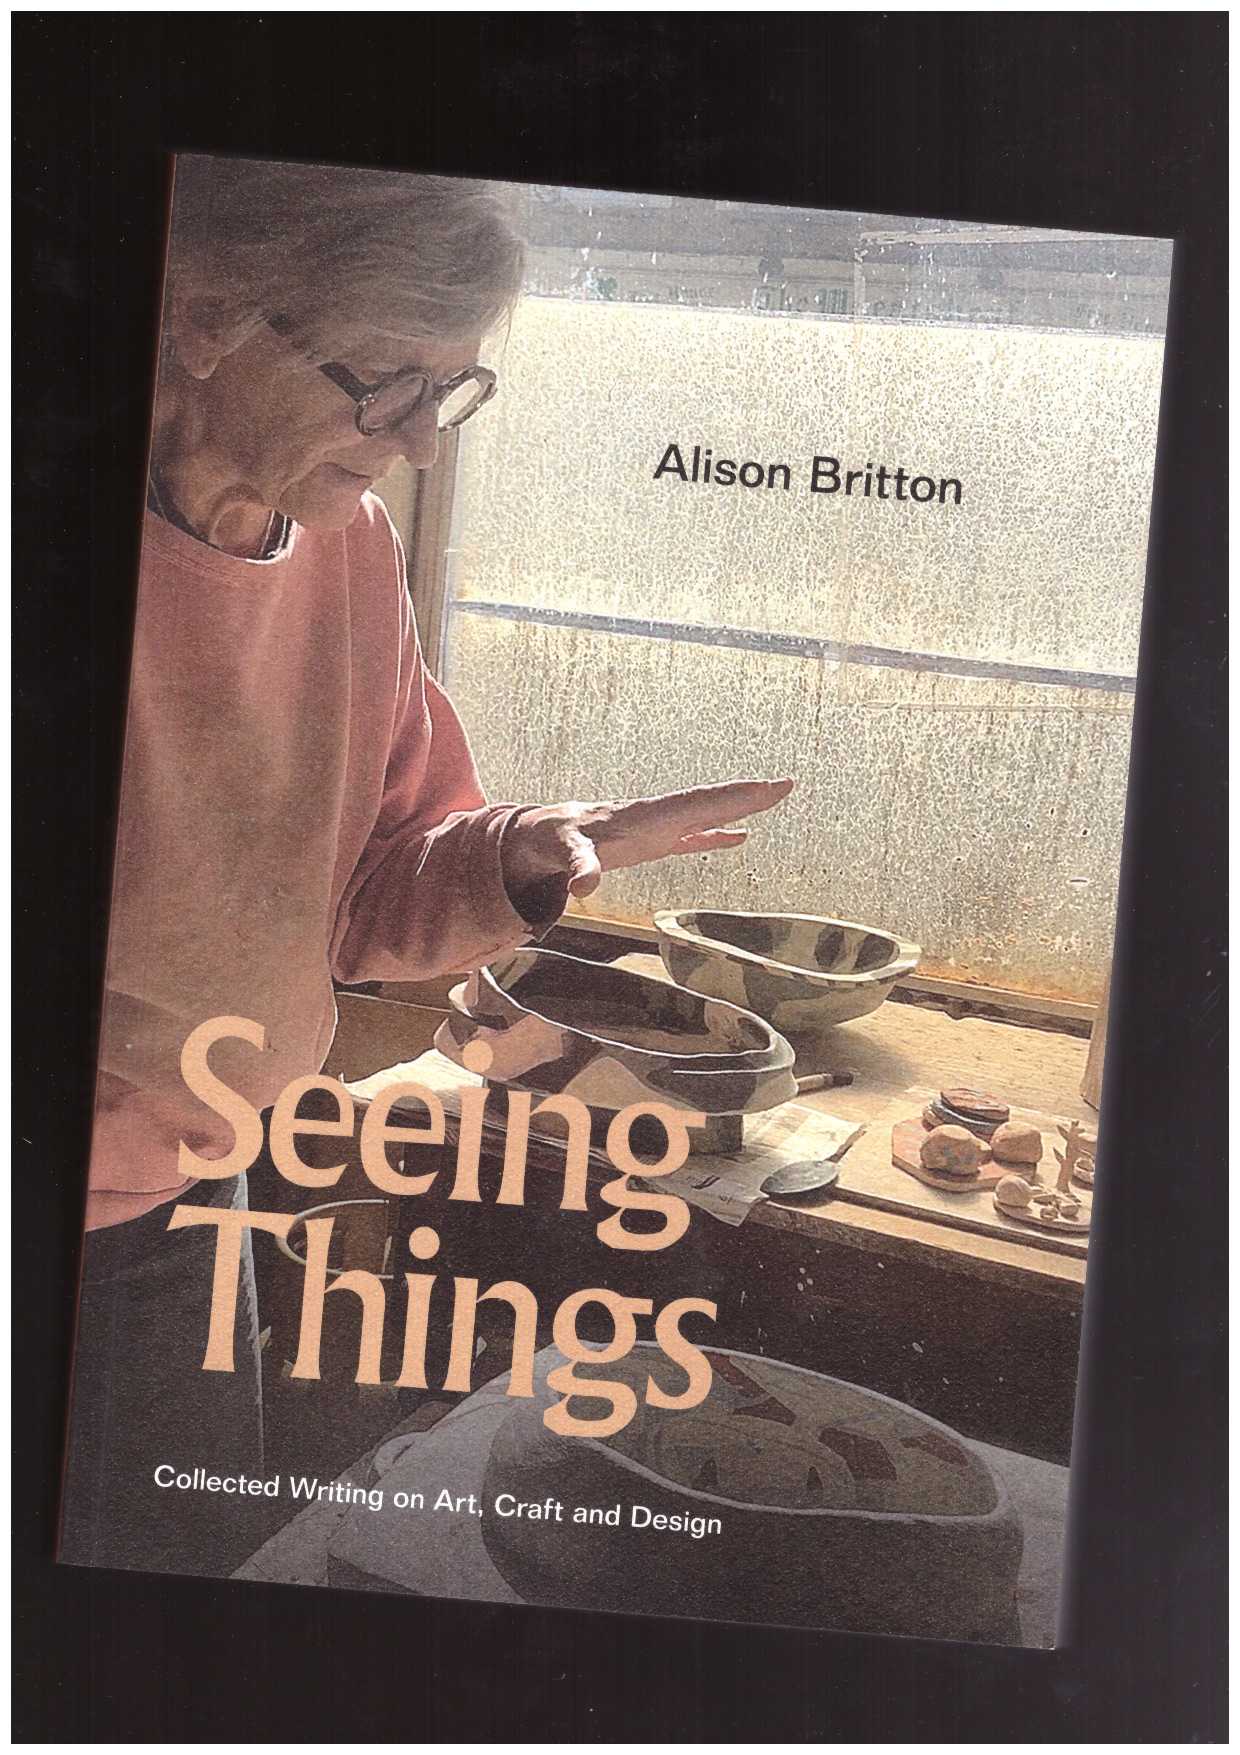 BRITTON, Alison - Seeing Things. Collected Writings on Art, Craft and Design